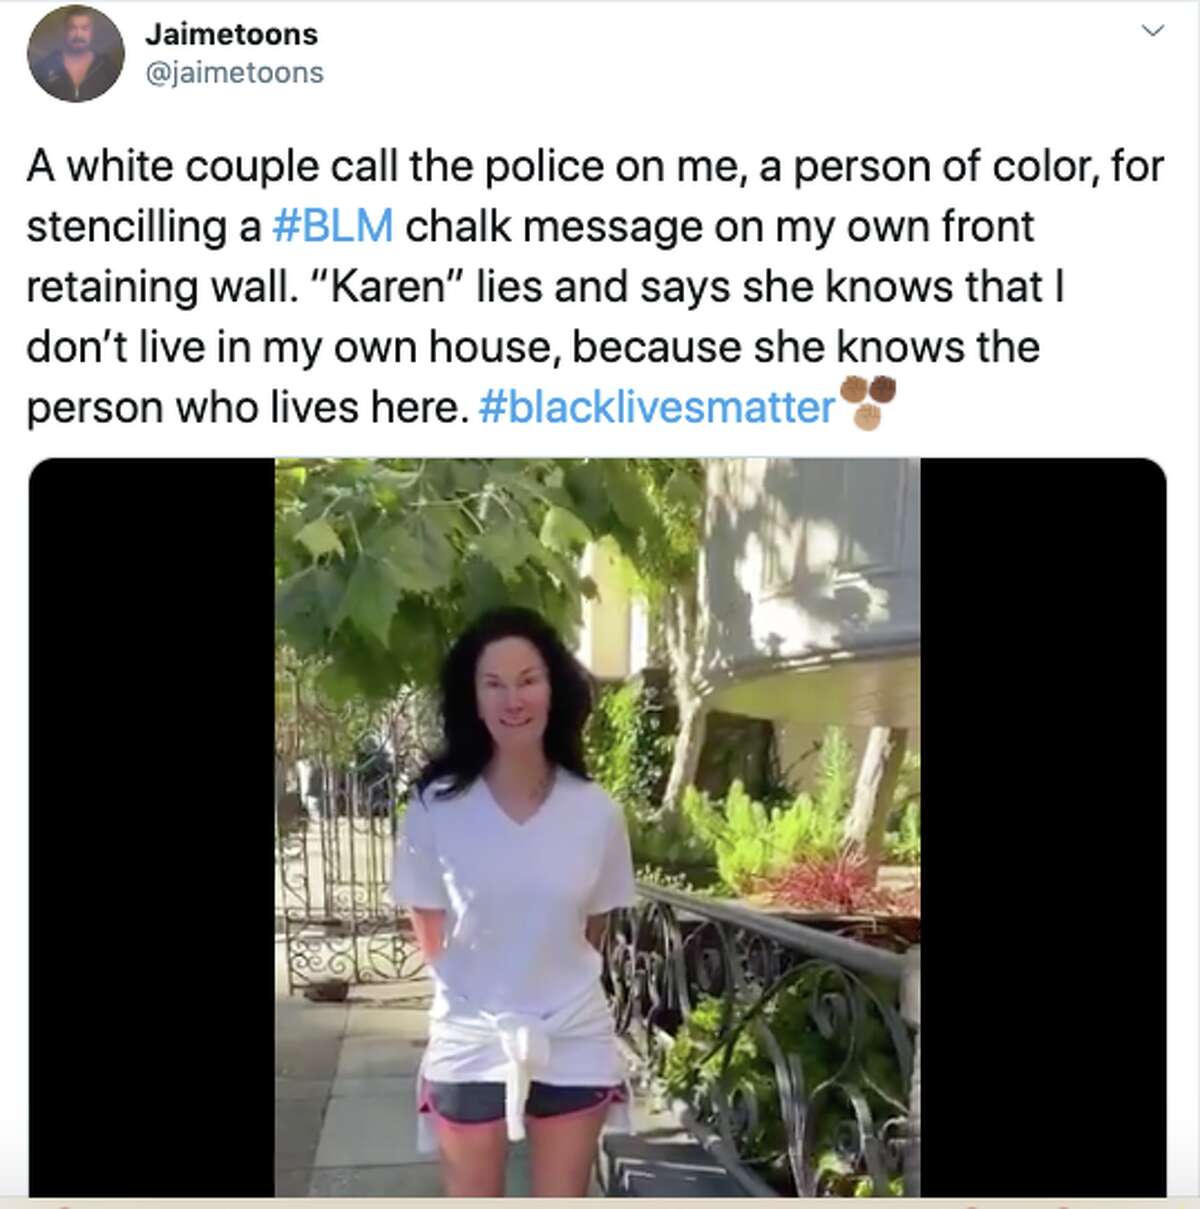 SF resident Lisa Alexander was under fire over the weekend after a viral video showed her confronting a man over writing "Black Lives Matter" on his retaining wall. She has since issued an apology.